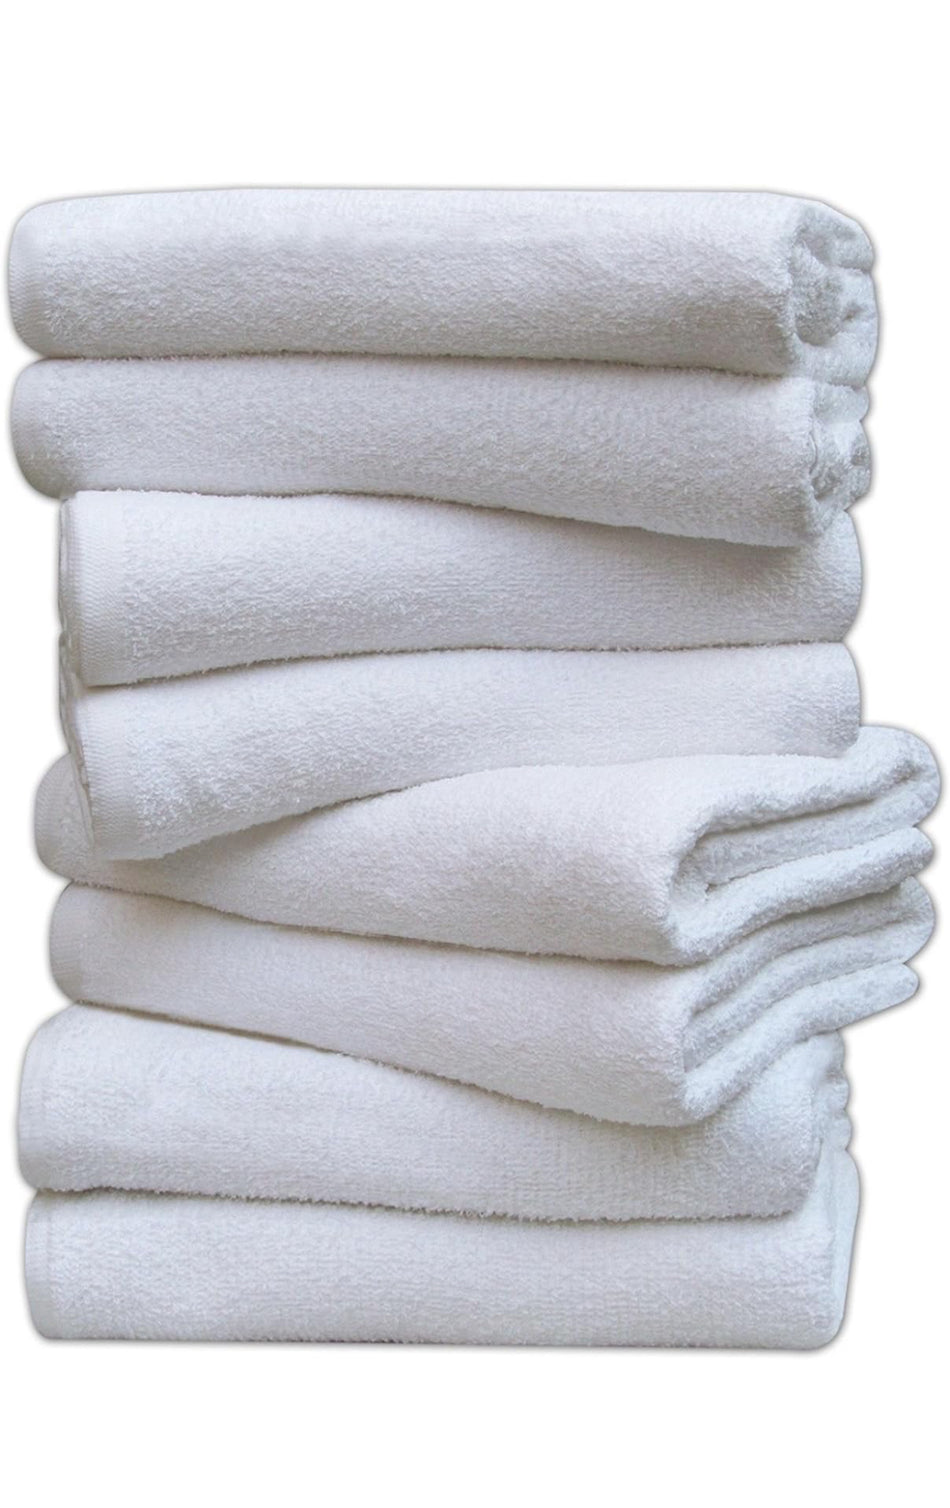 NIMBUS Cleaning Accessories - White Terry Towels Pack of 10